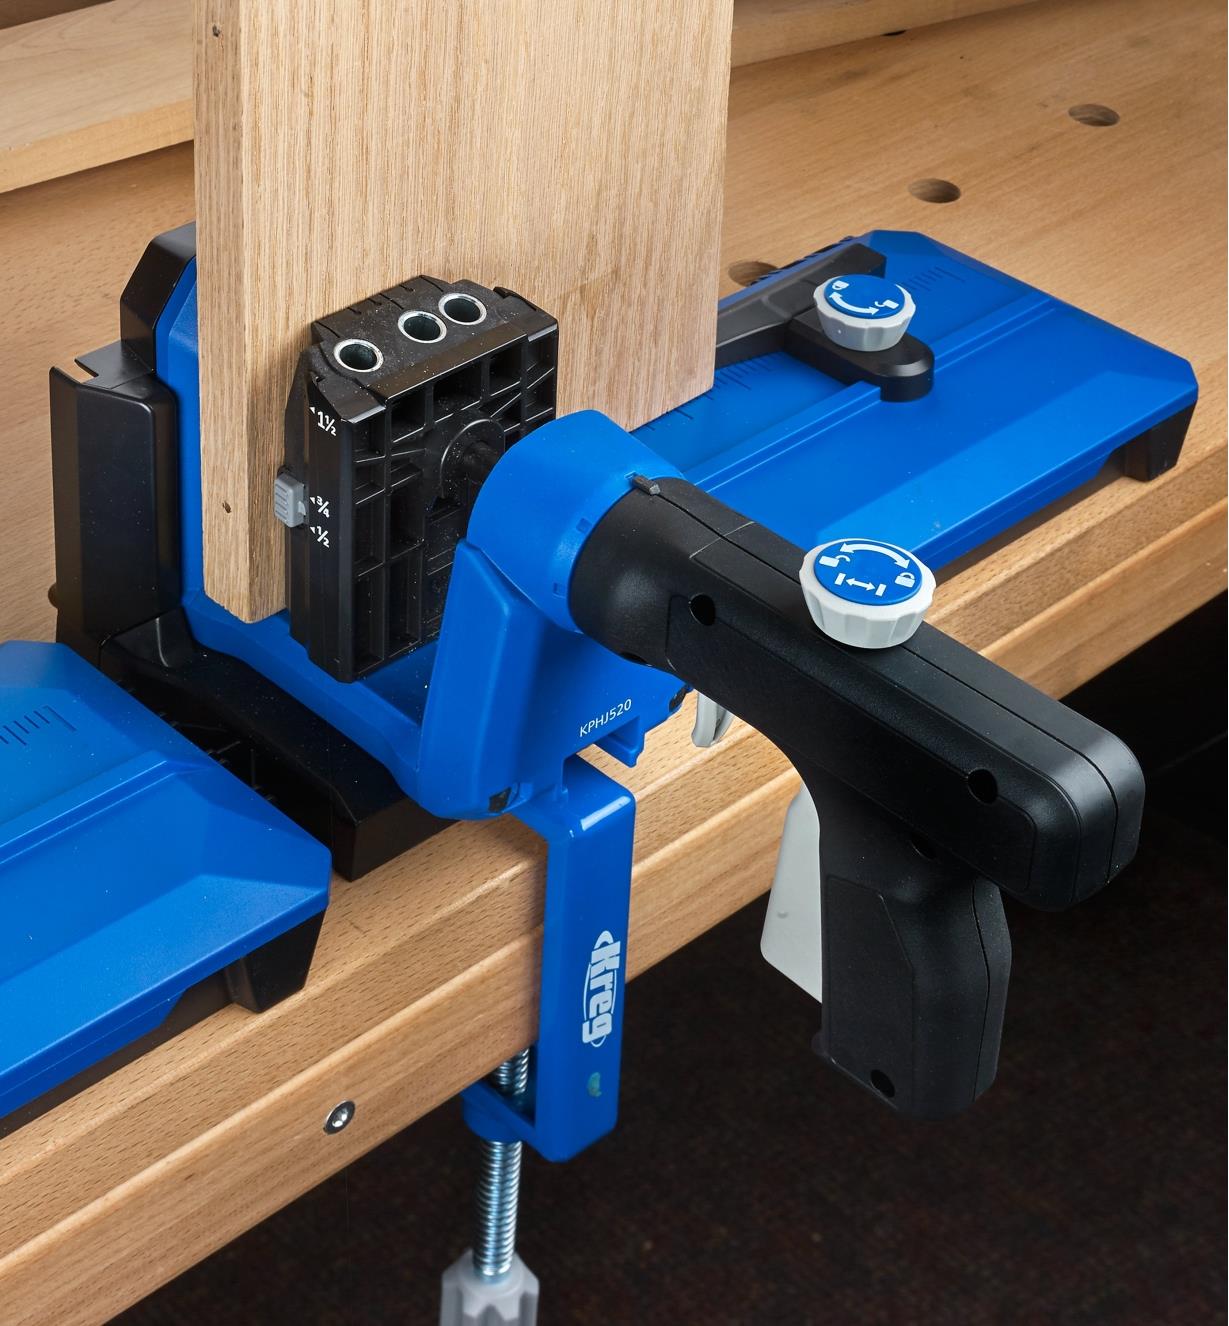 A Kreg 520 Pro jig mounted on the docking station to use its work stops for precise hole placement